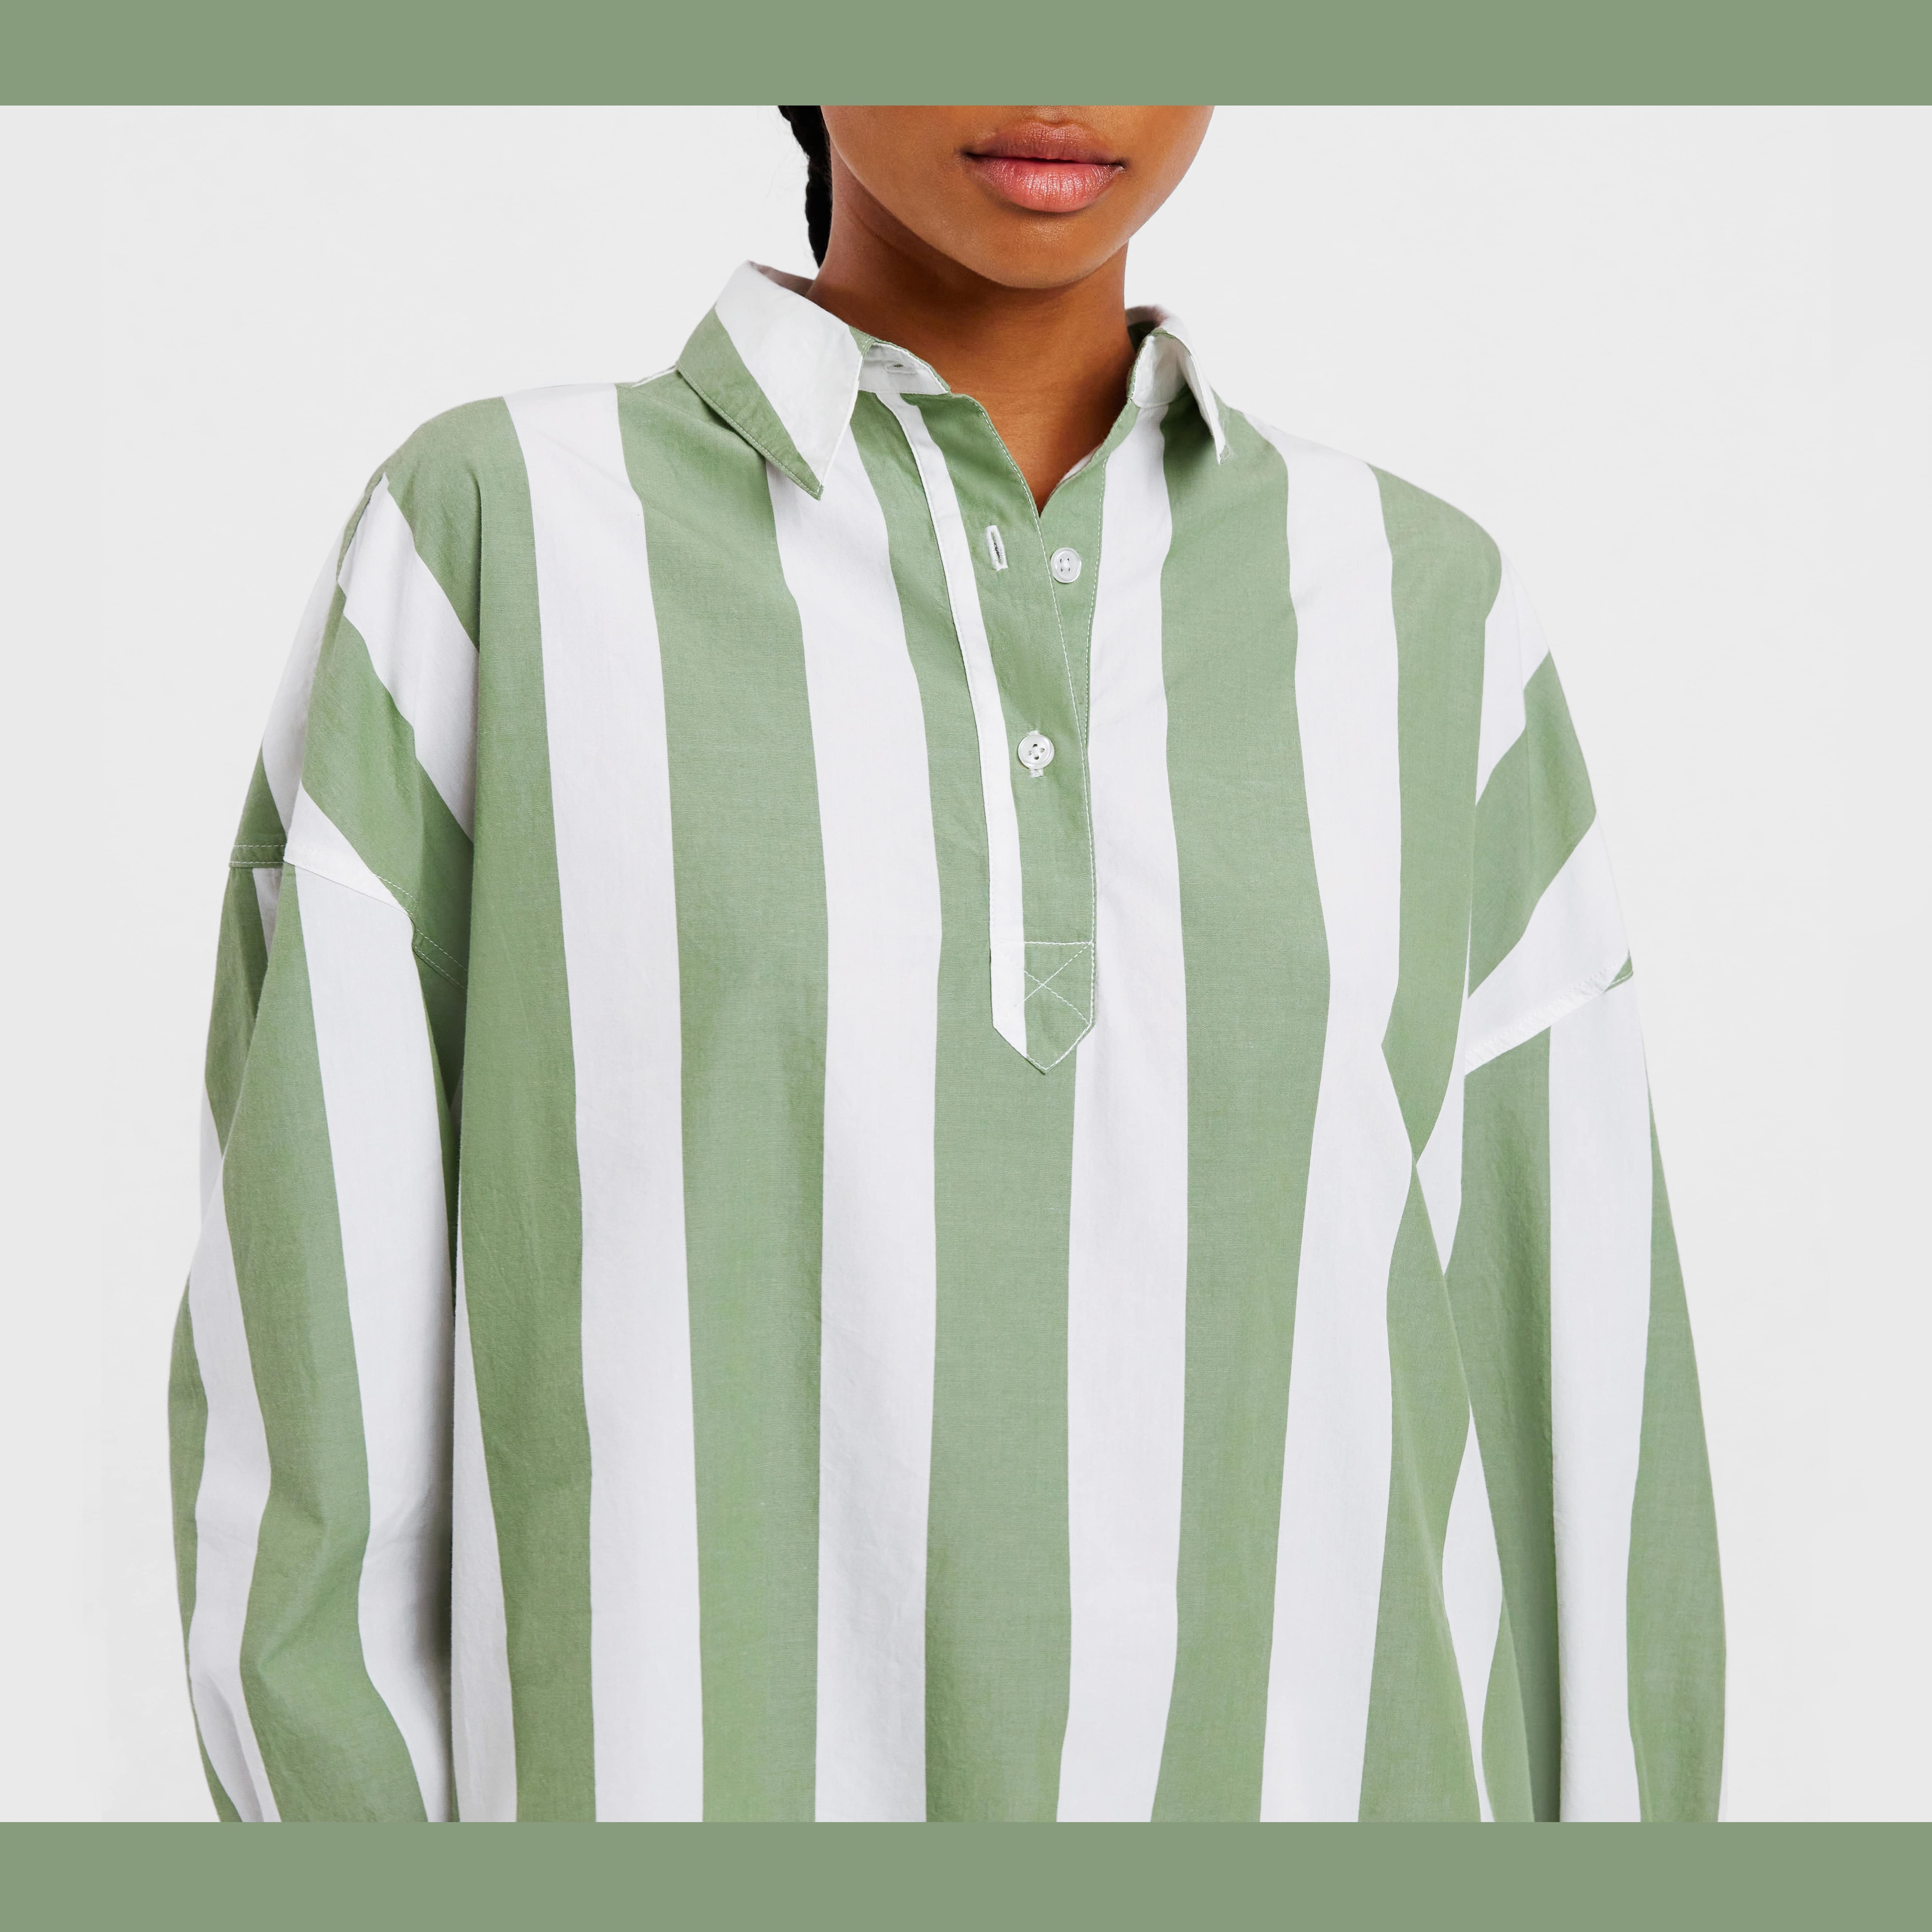 brown skinned woman wears white and green striped cypress shirt. rugby style shirt, relaxed fit with placket and collar.